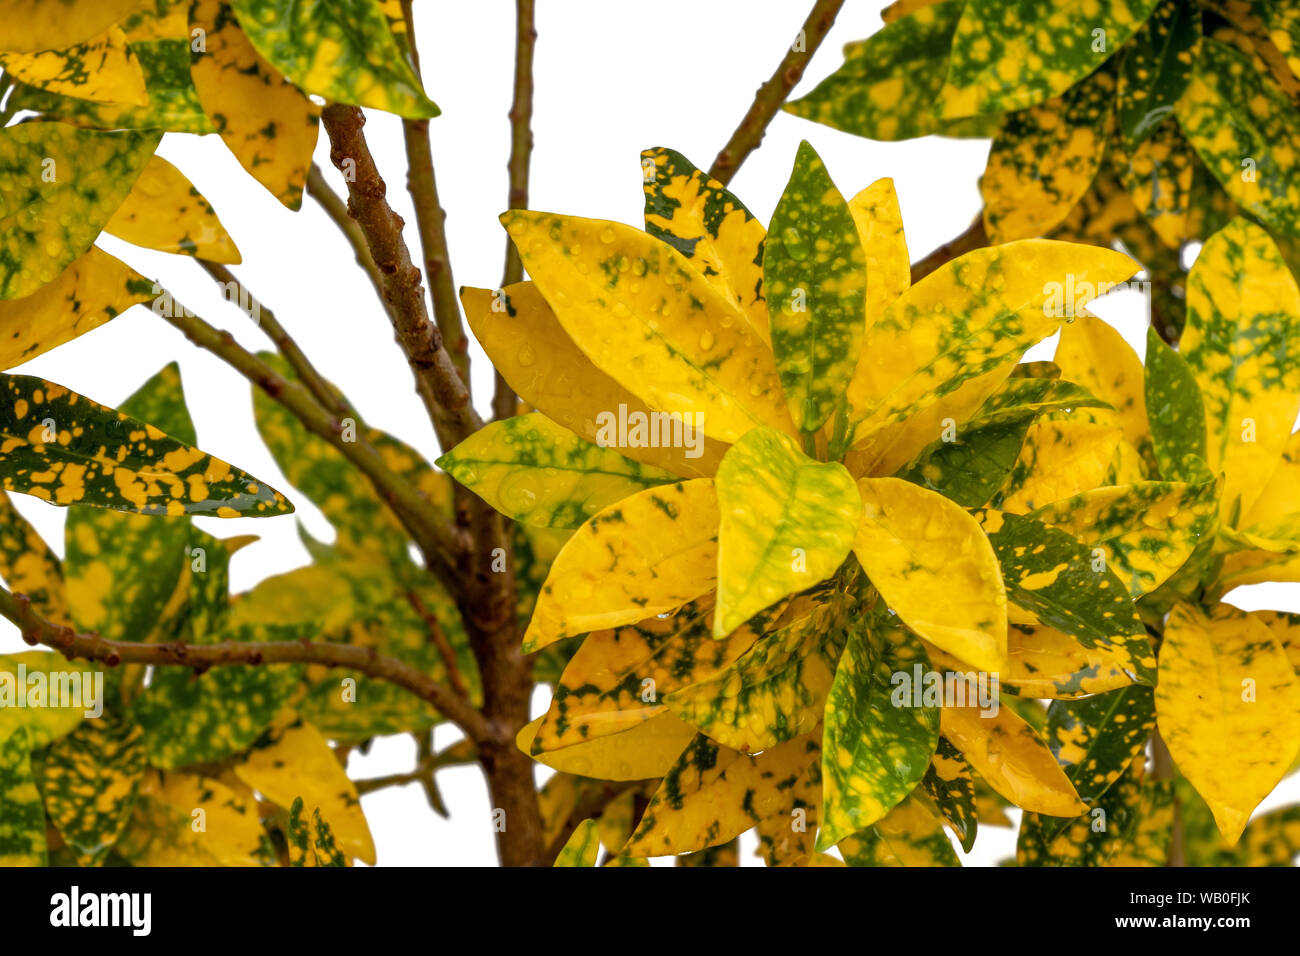 Leaf of Codiaeum Variegatum Tree Croton Plant, Colorful green and yellow leafs on white background. Stock Photo